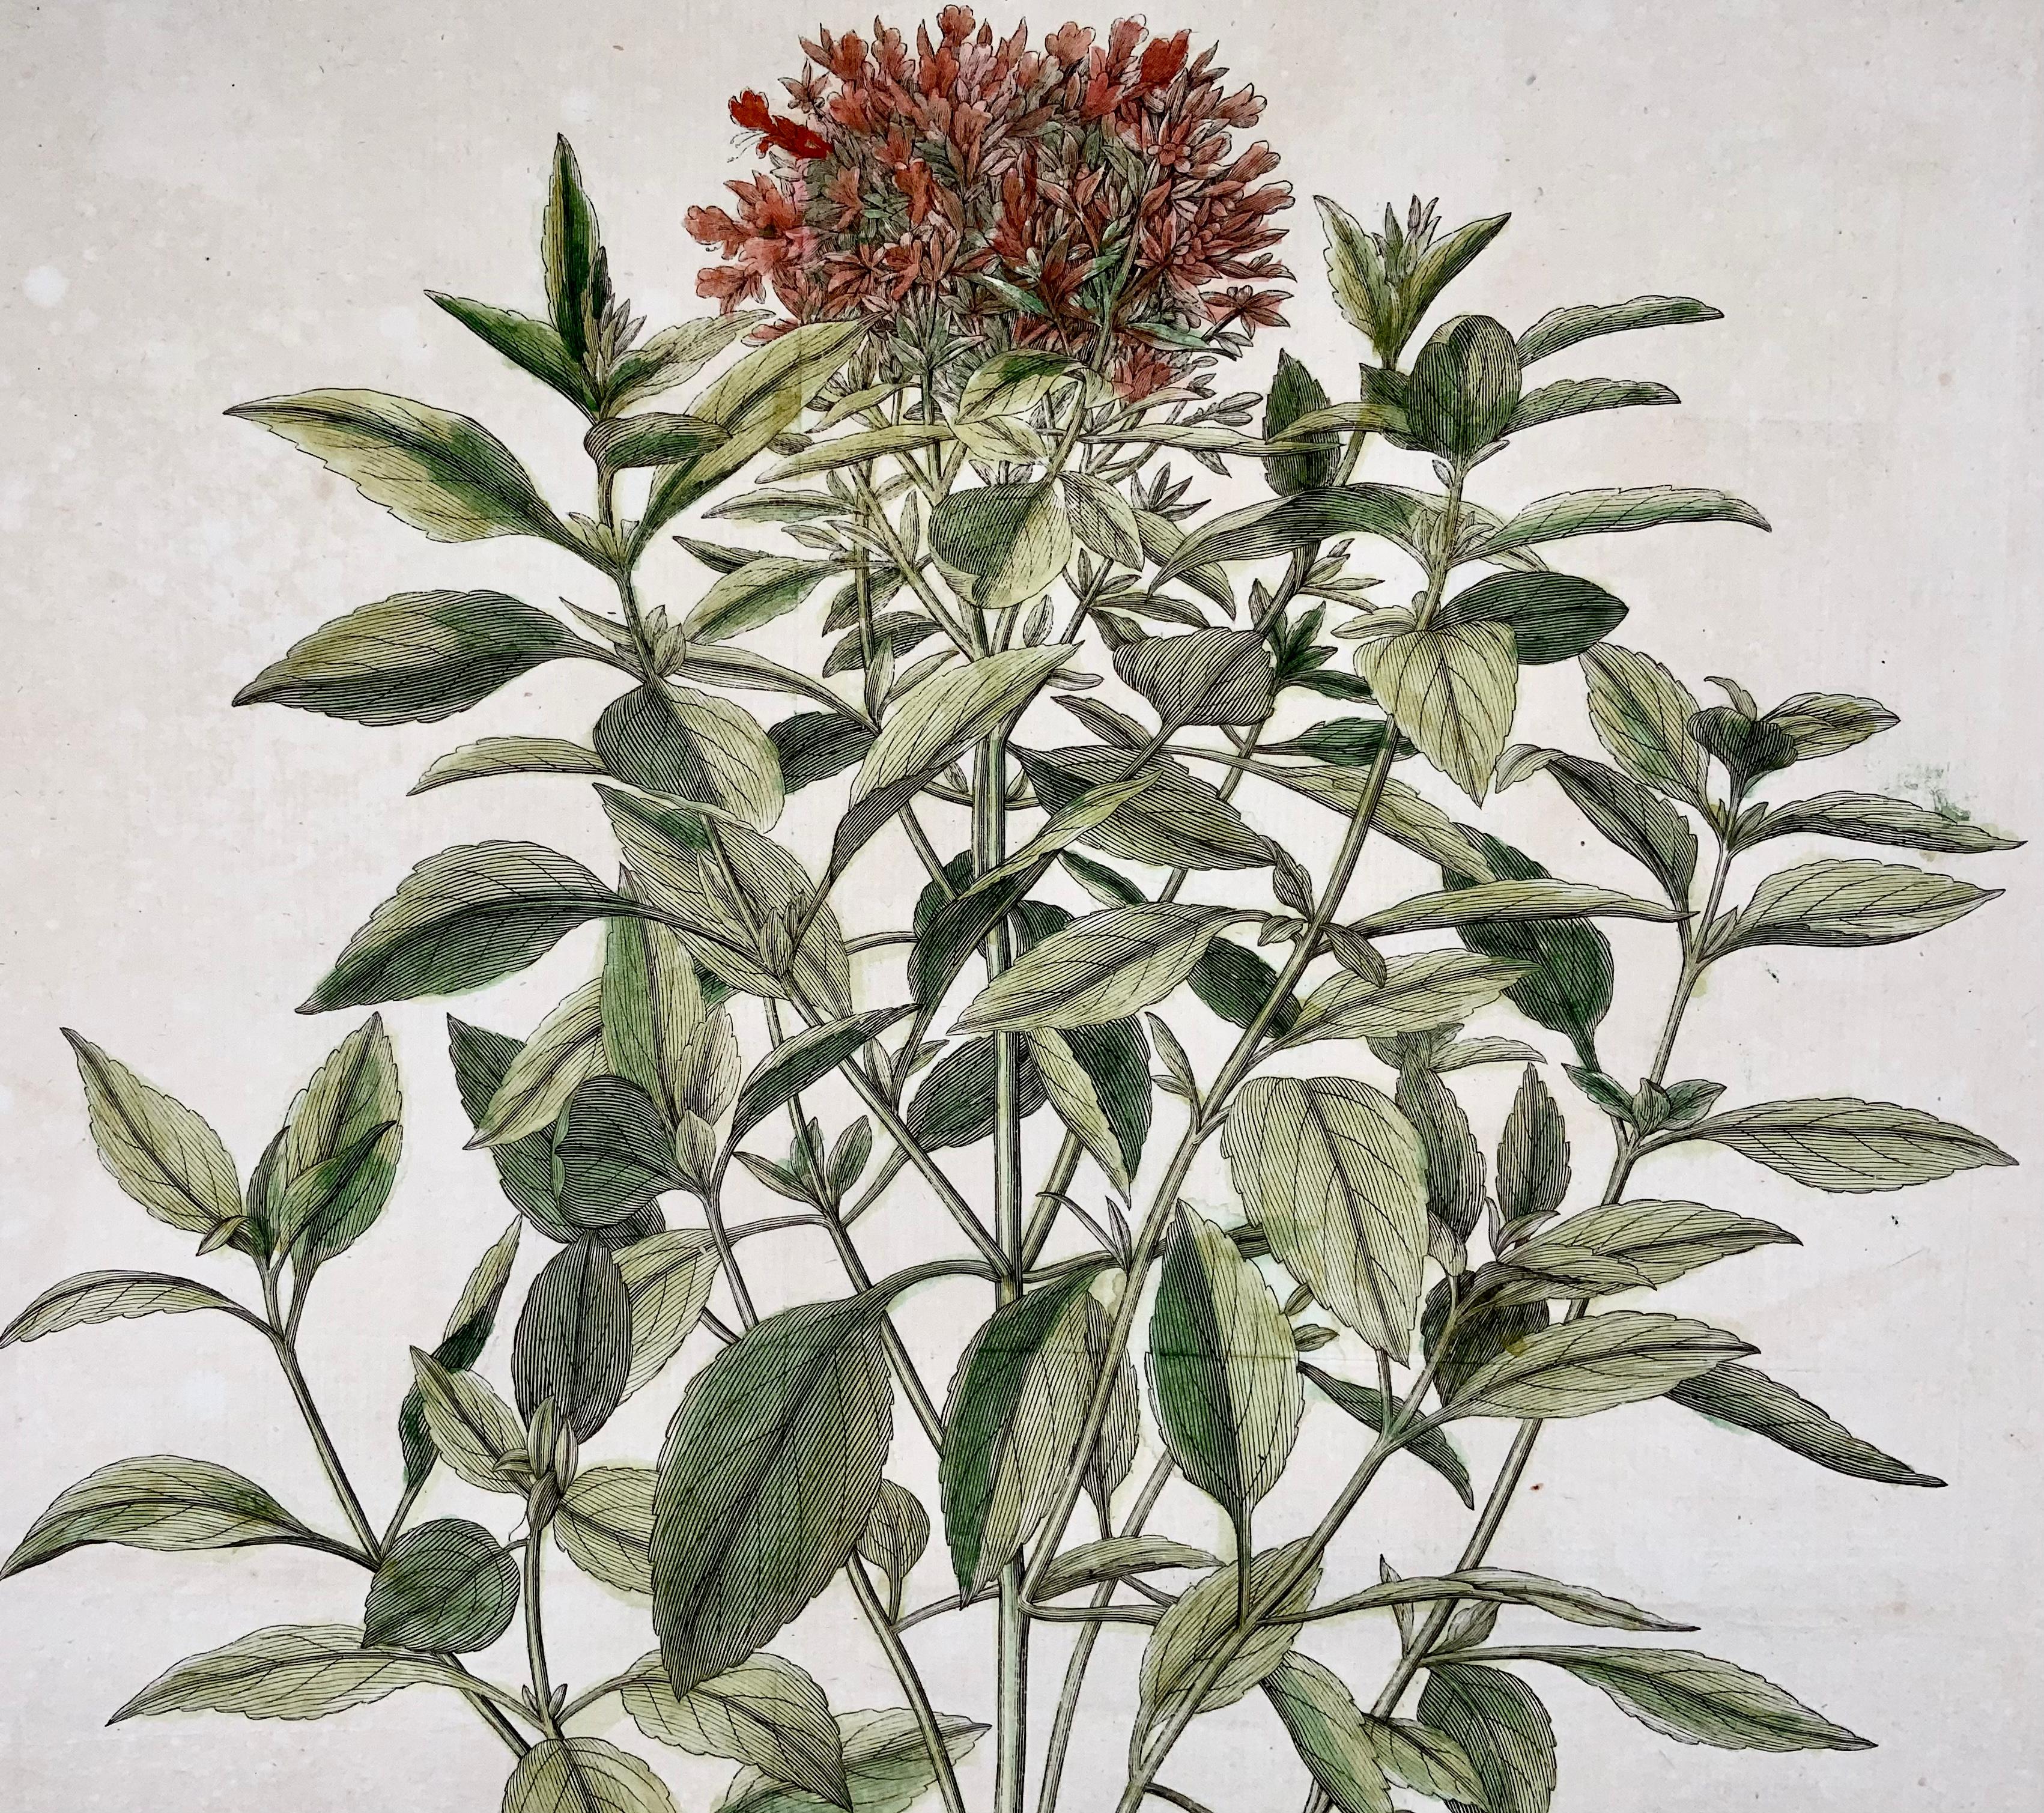 Hand-Painted Red Basil, Herbs, Large Folio, J. G. Sturm for Johan Andreas Murray